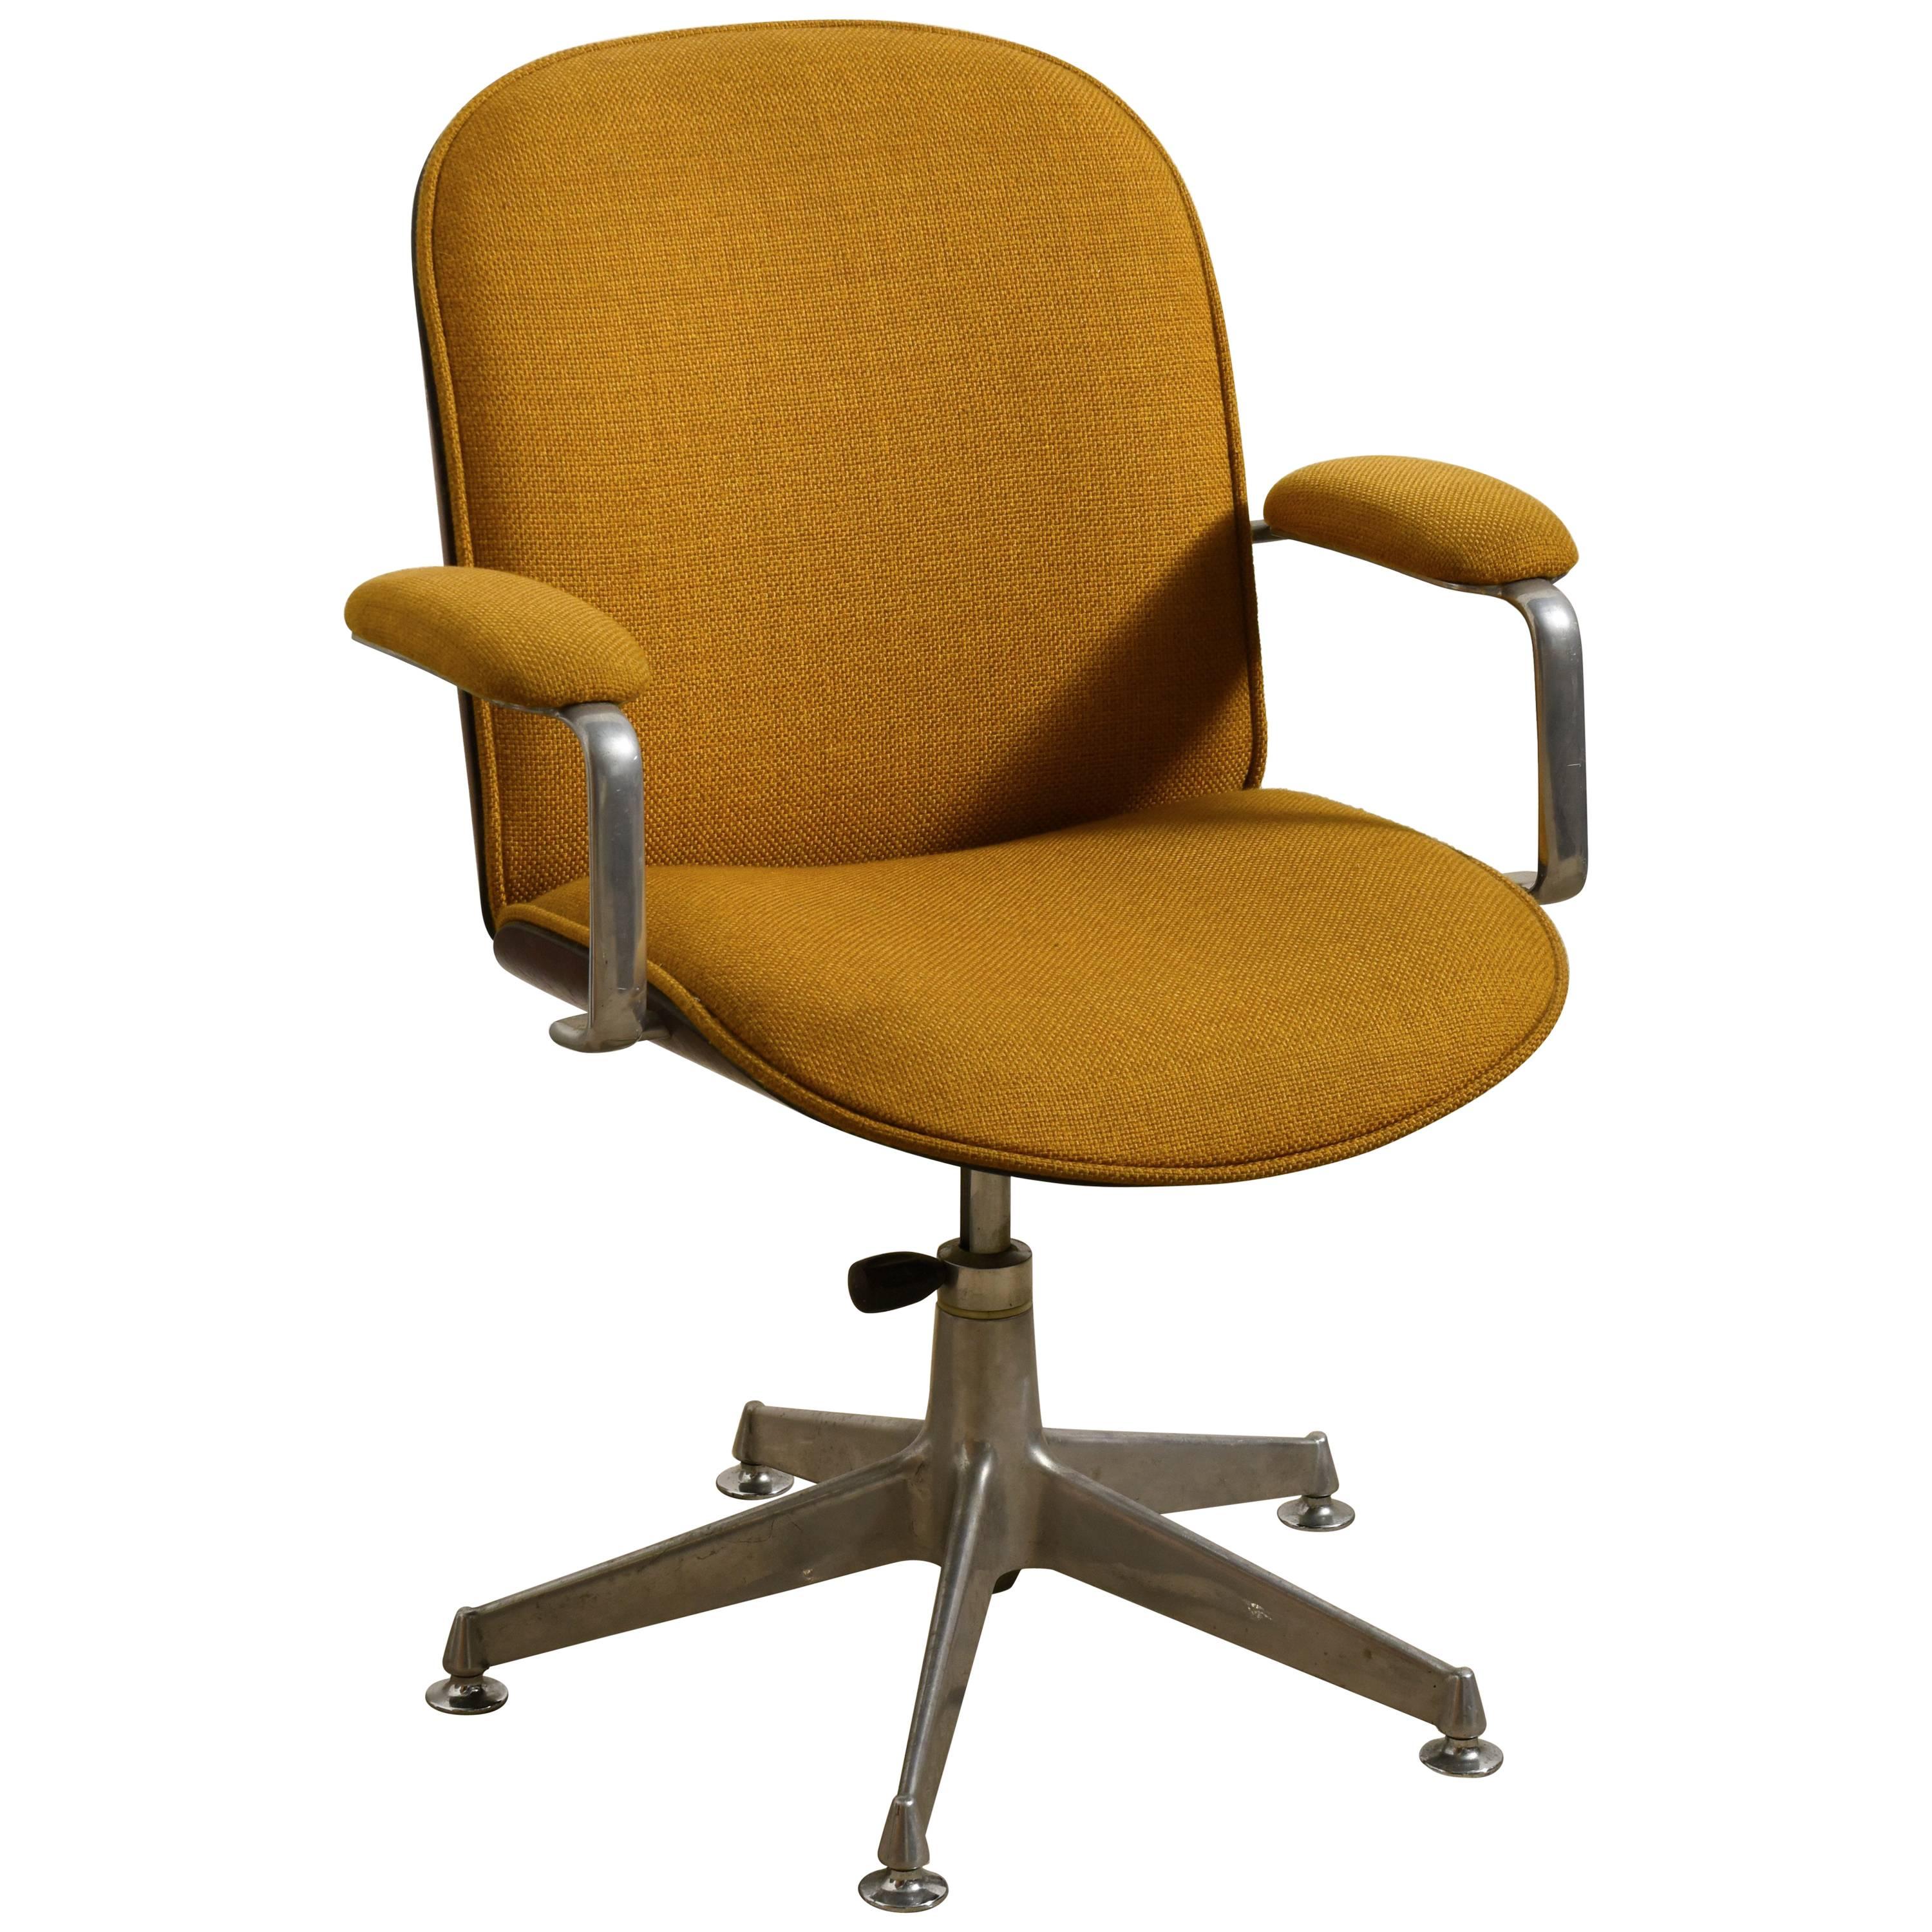 I. Parisi for MIM, Roma Swivel Office Chairs of 'Terni' Series with Armrests 